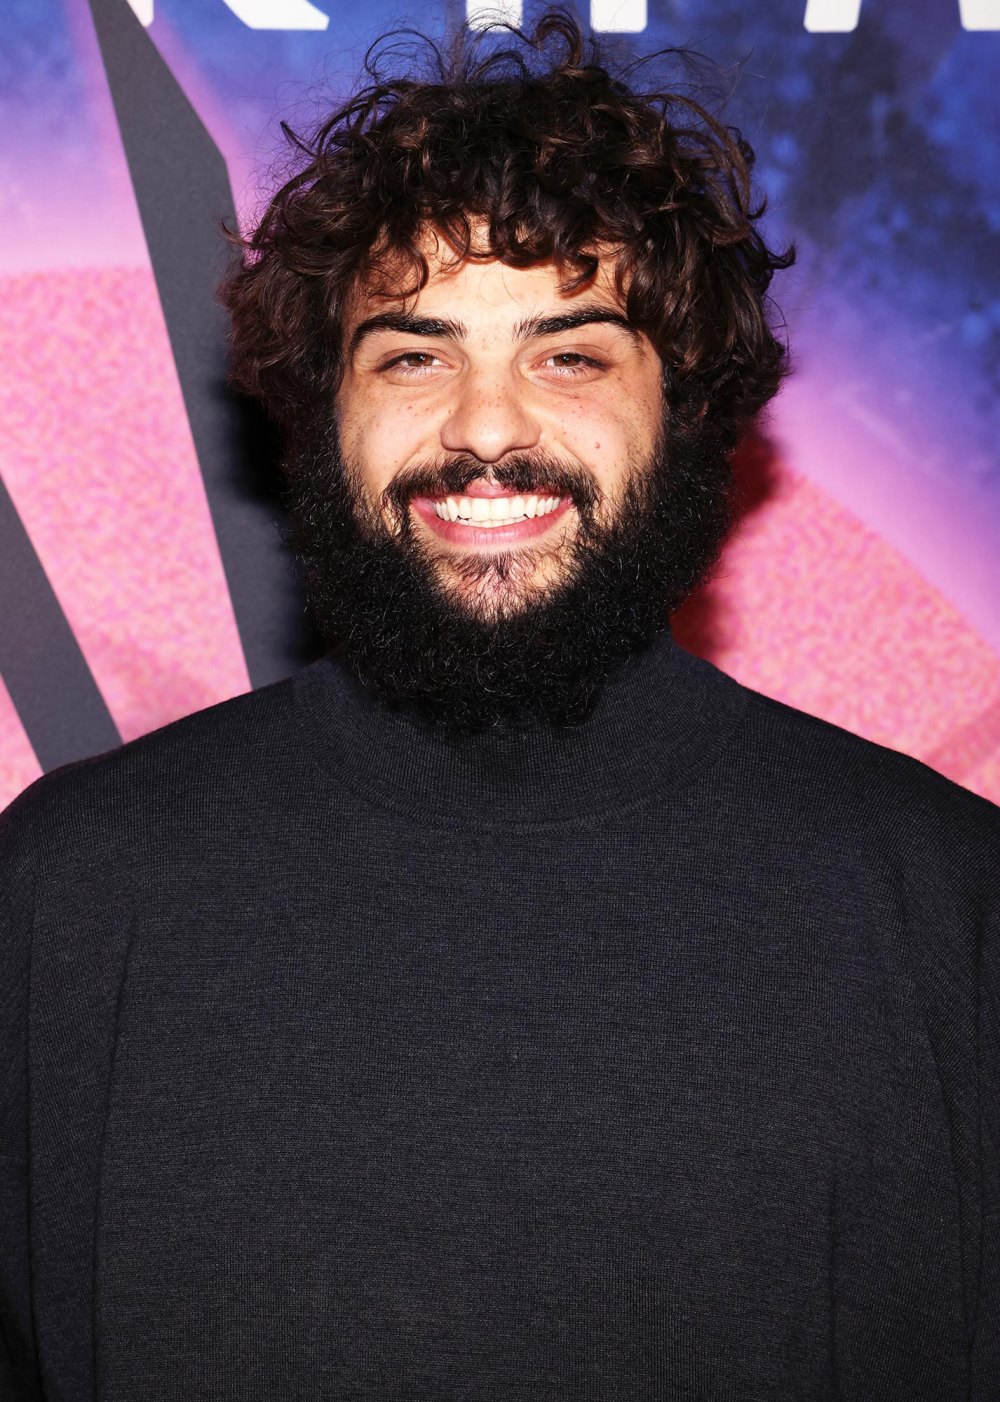 The cast of Fosters reunites after Good Trouble, but Noah Centineo is missing